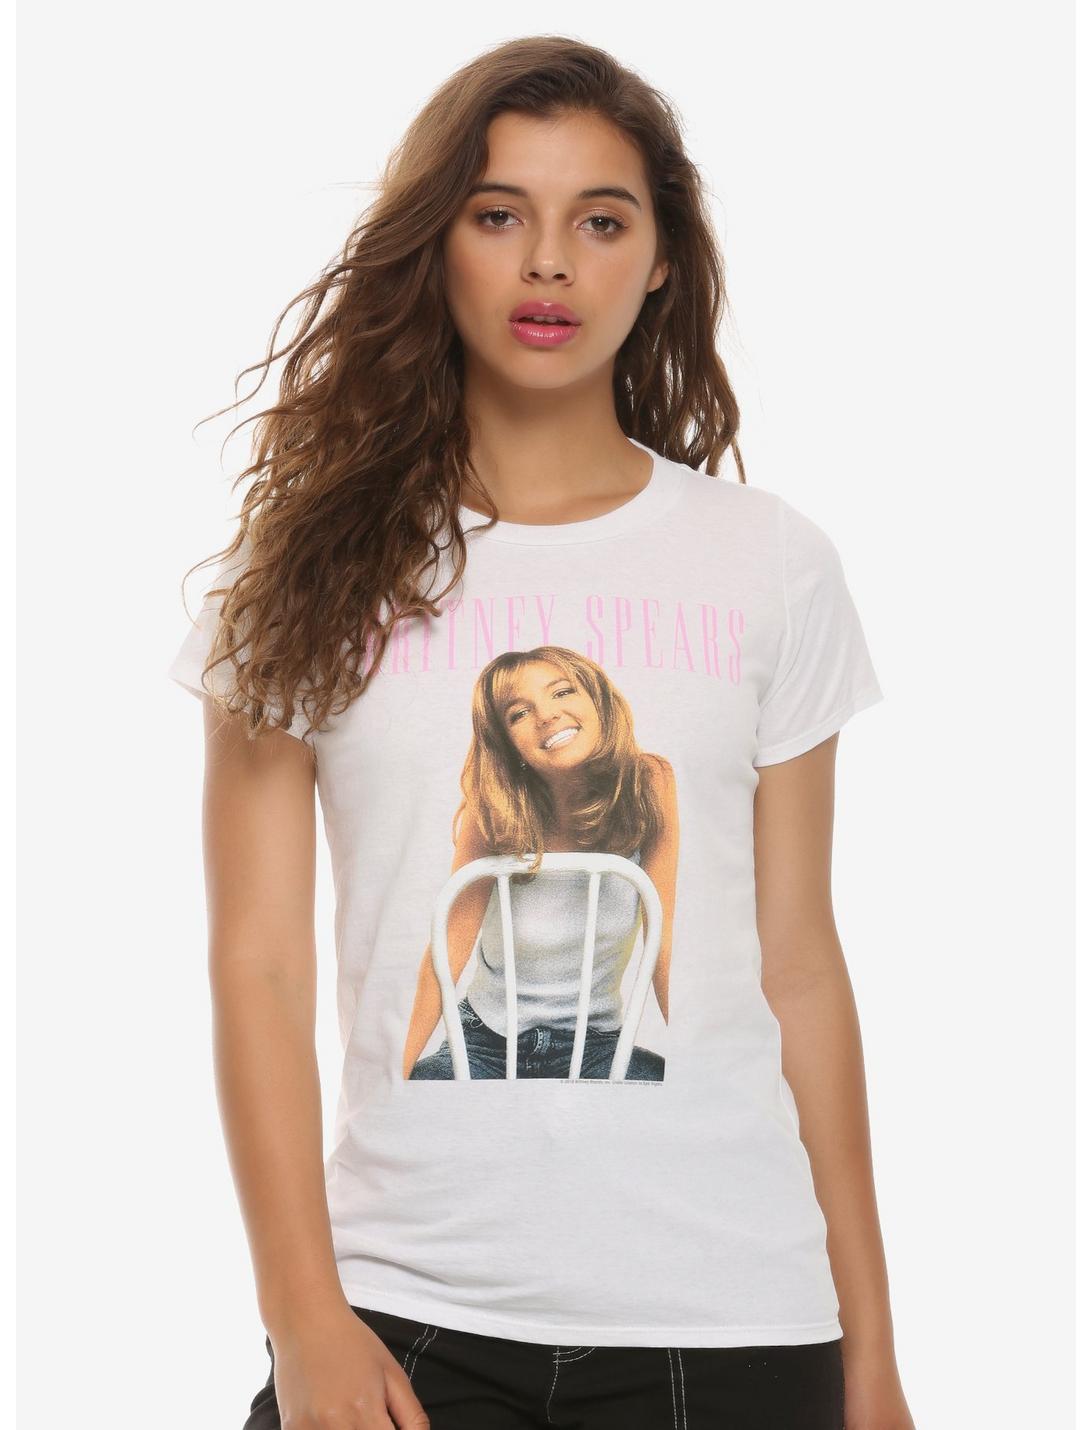 Britney Spears Baby One More Time Girls T-Shirt, WHITE, hi-res